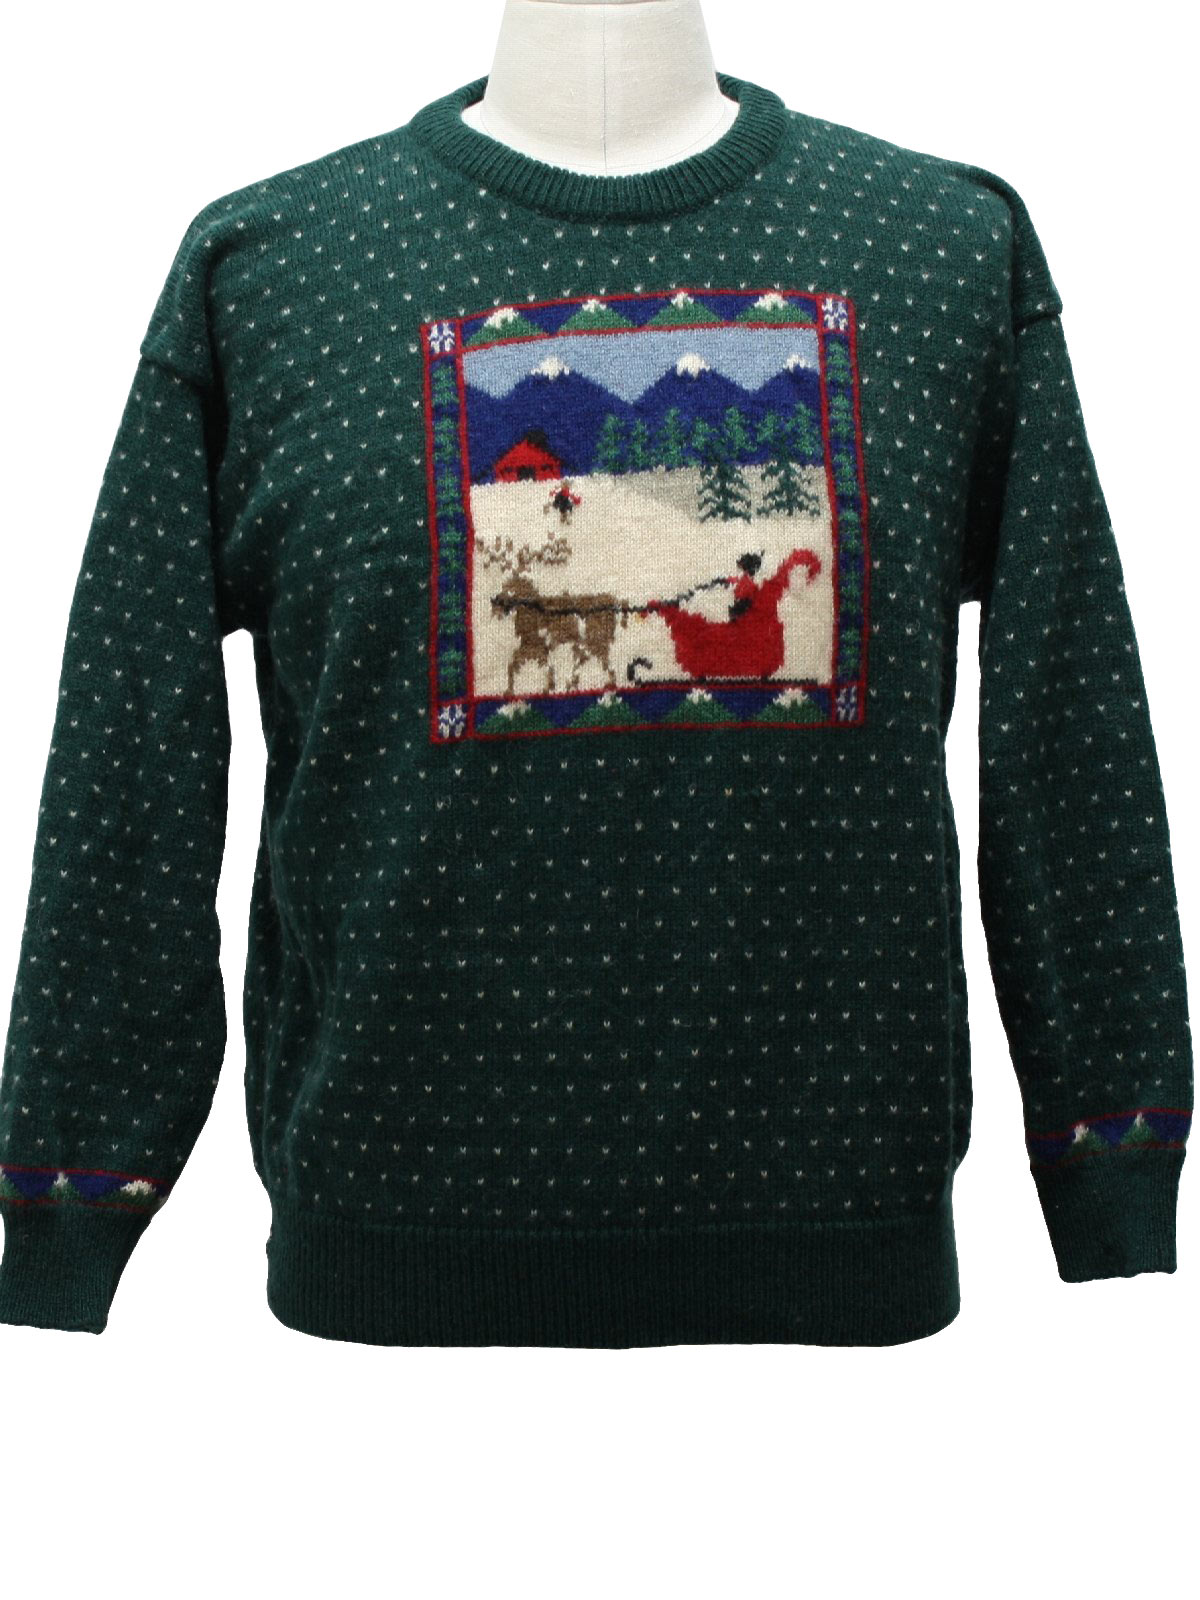 Mens Ugly Christmas Sweater: -Eddie Bauer- Mens forest green wool ...